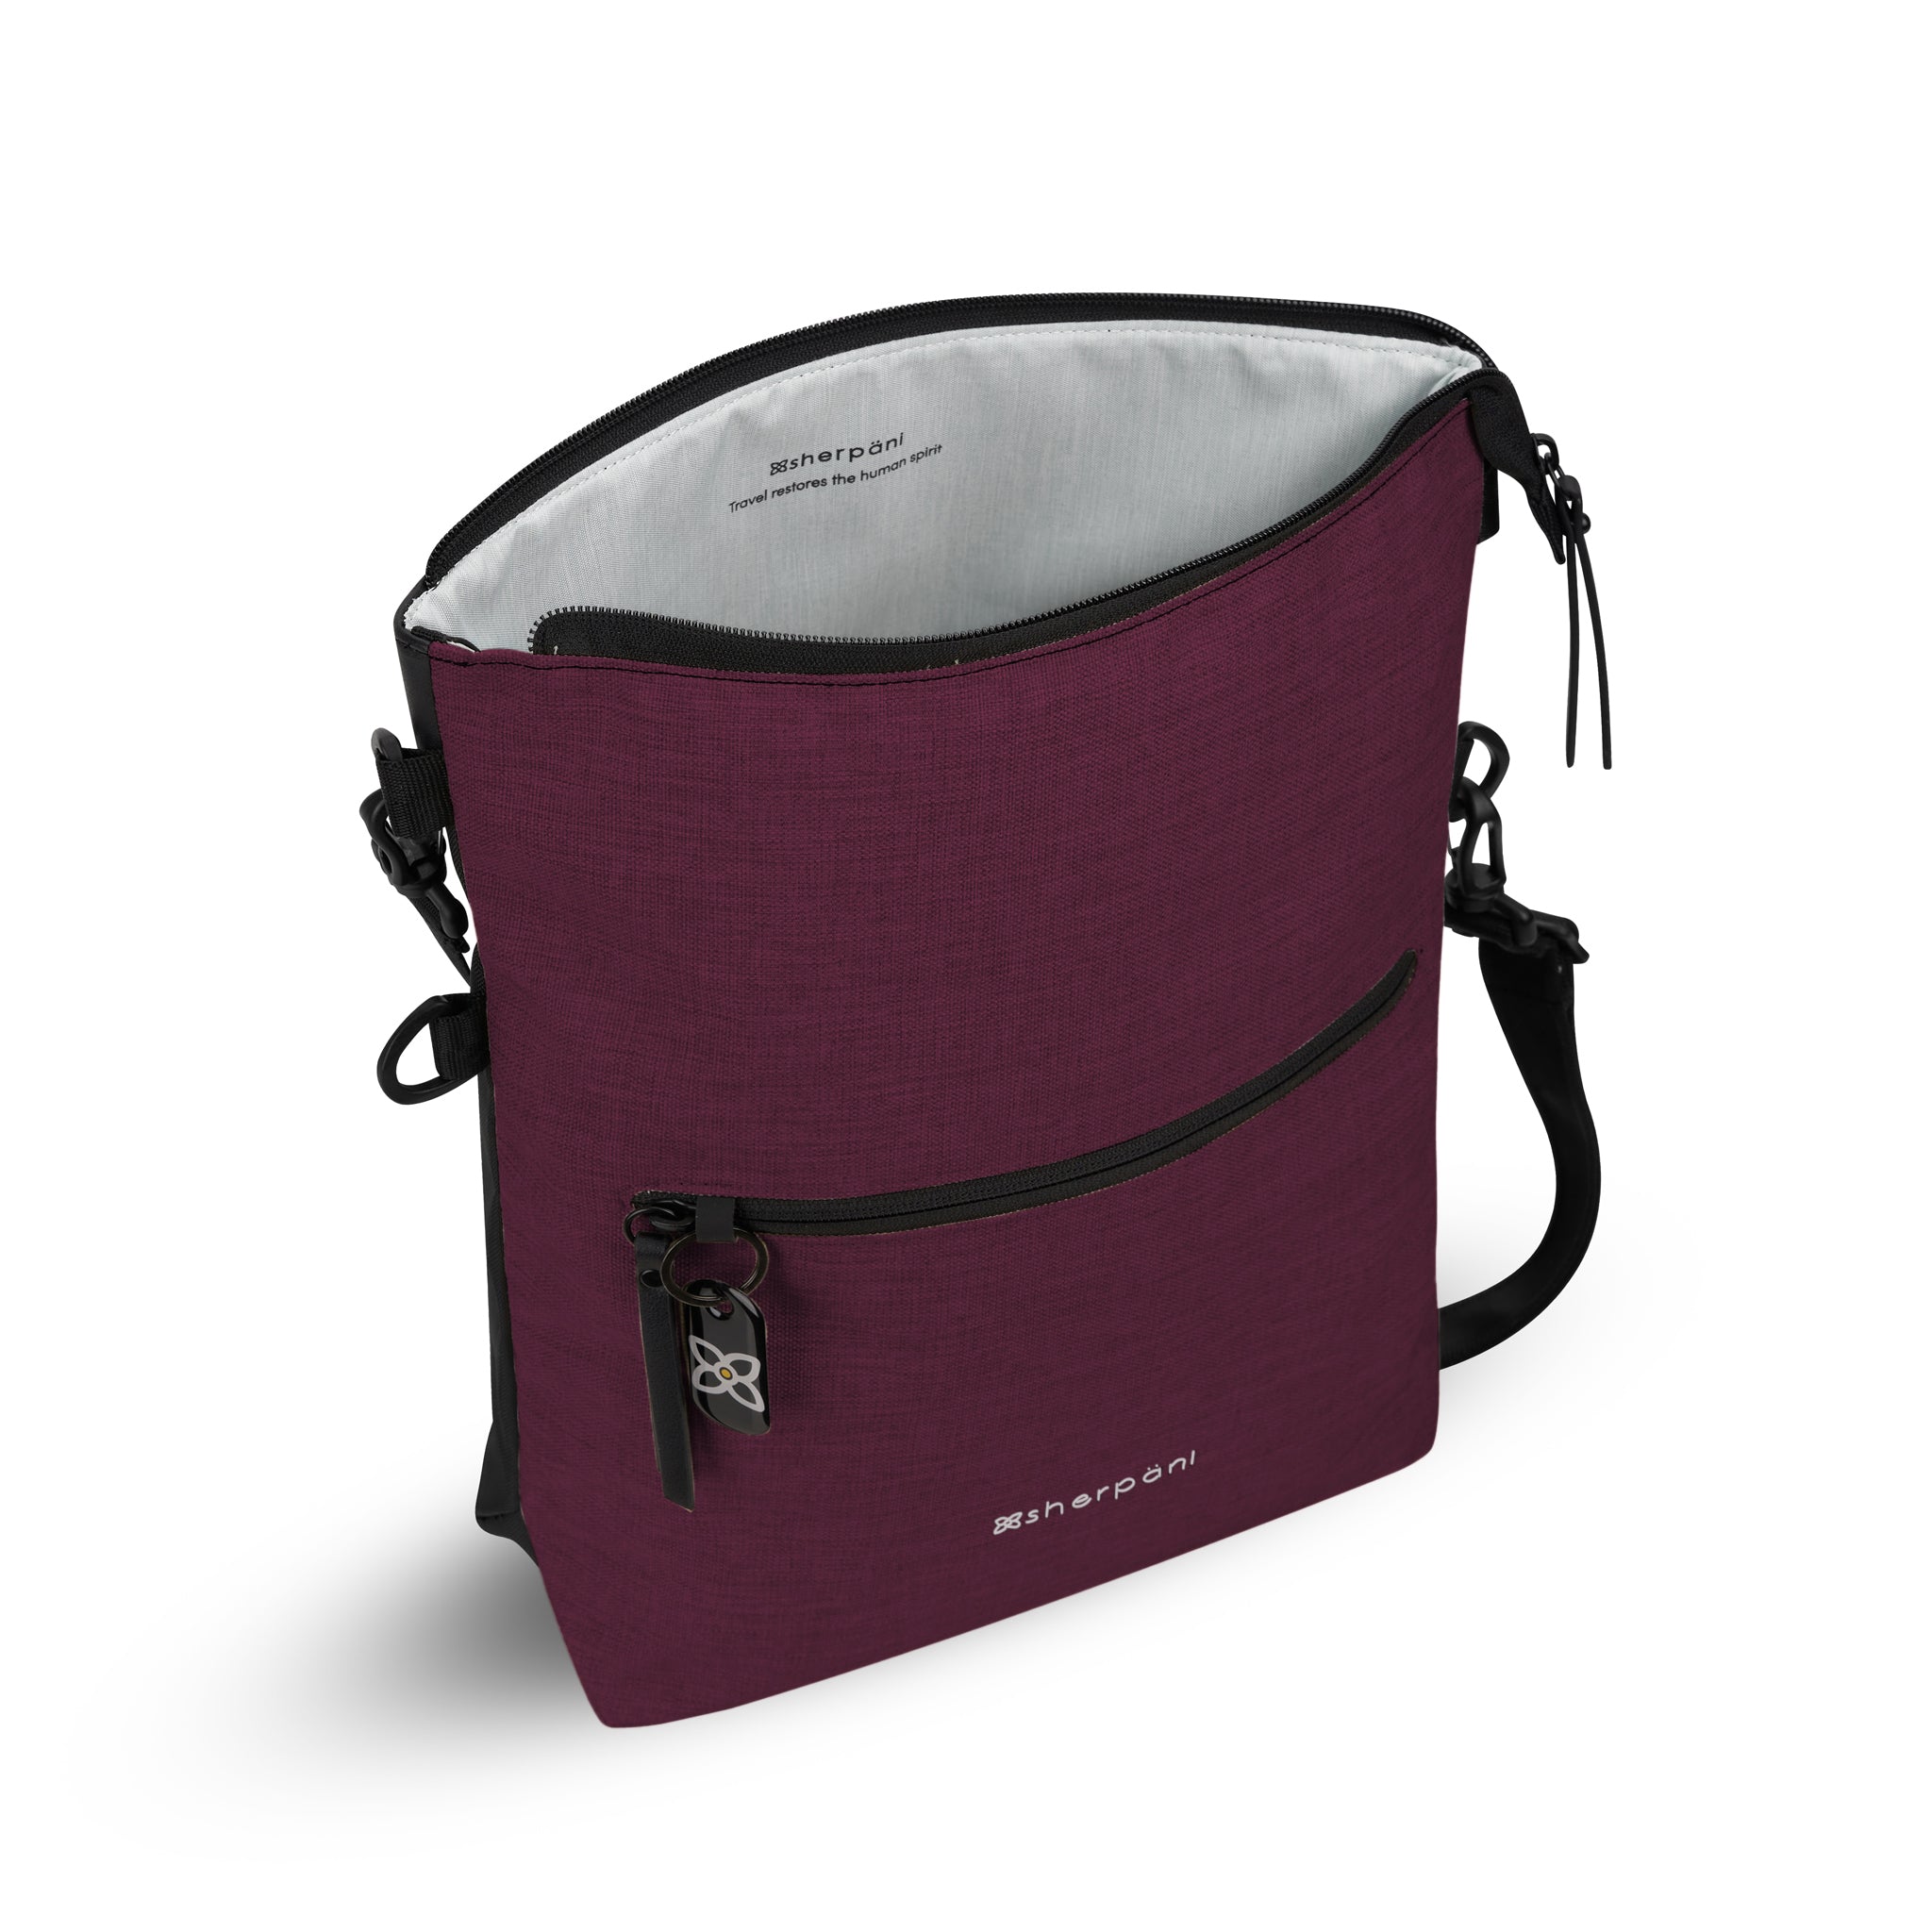 Top view of Sherpani’s Anti-Theft bag, the Vale AT in Merlot. The main zipper compartment is open to reveal a pale blue interior. A chair loop lock is clipped to the side of the bag. The front features an external compartment with a locking zipper and ReturnMe tag. An adjustable/detachable crossbody strap is attached to the bag. 